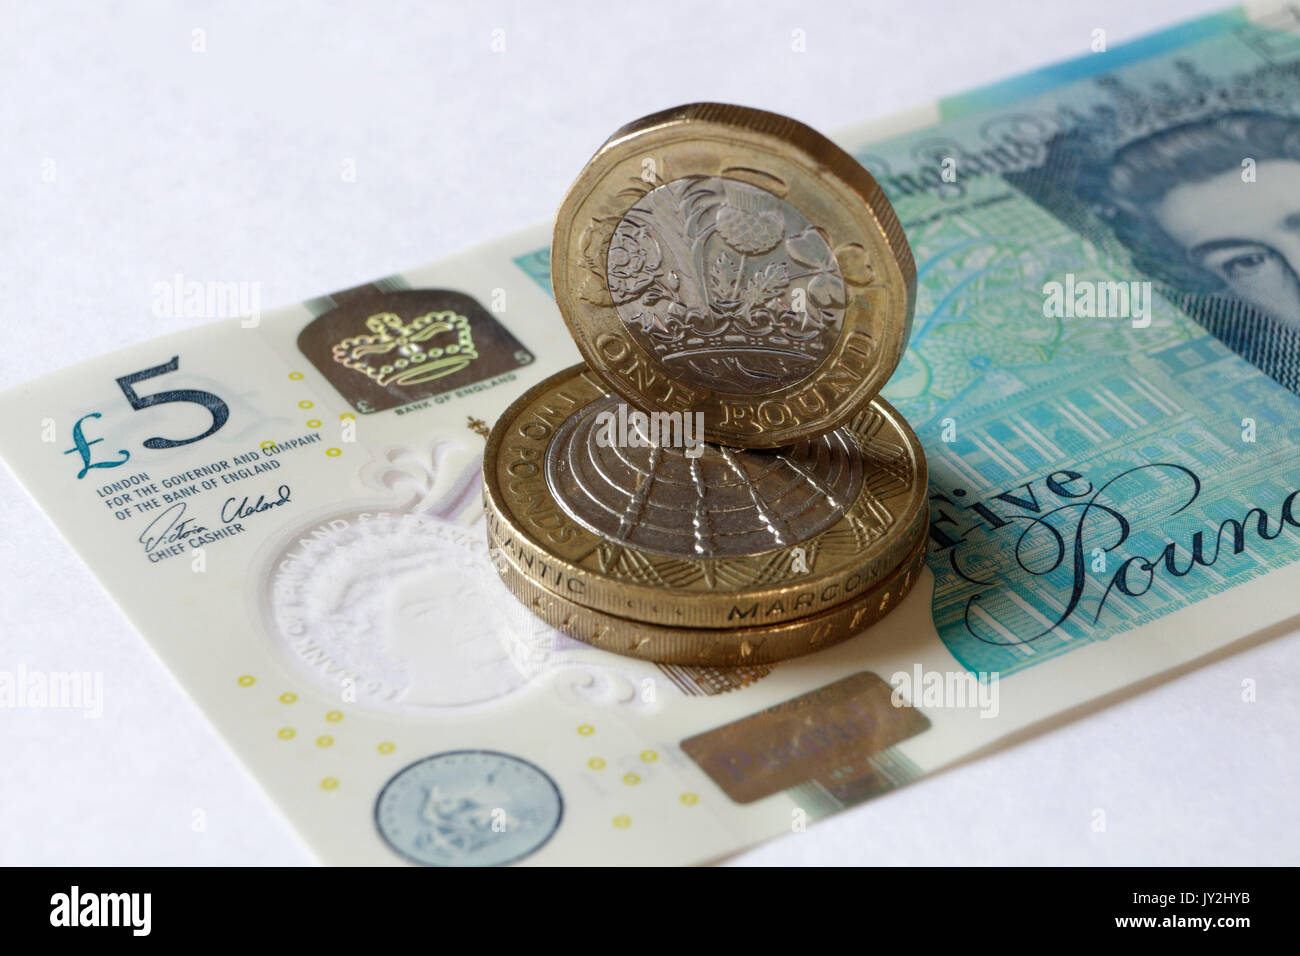 New British Pound coin and five pound note Stock Photo